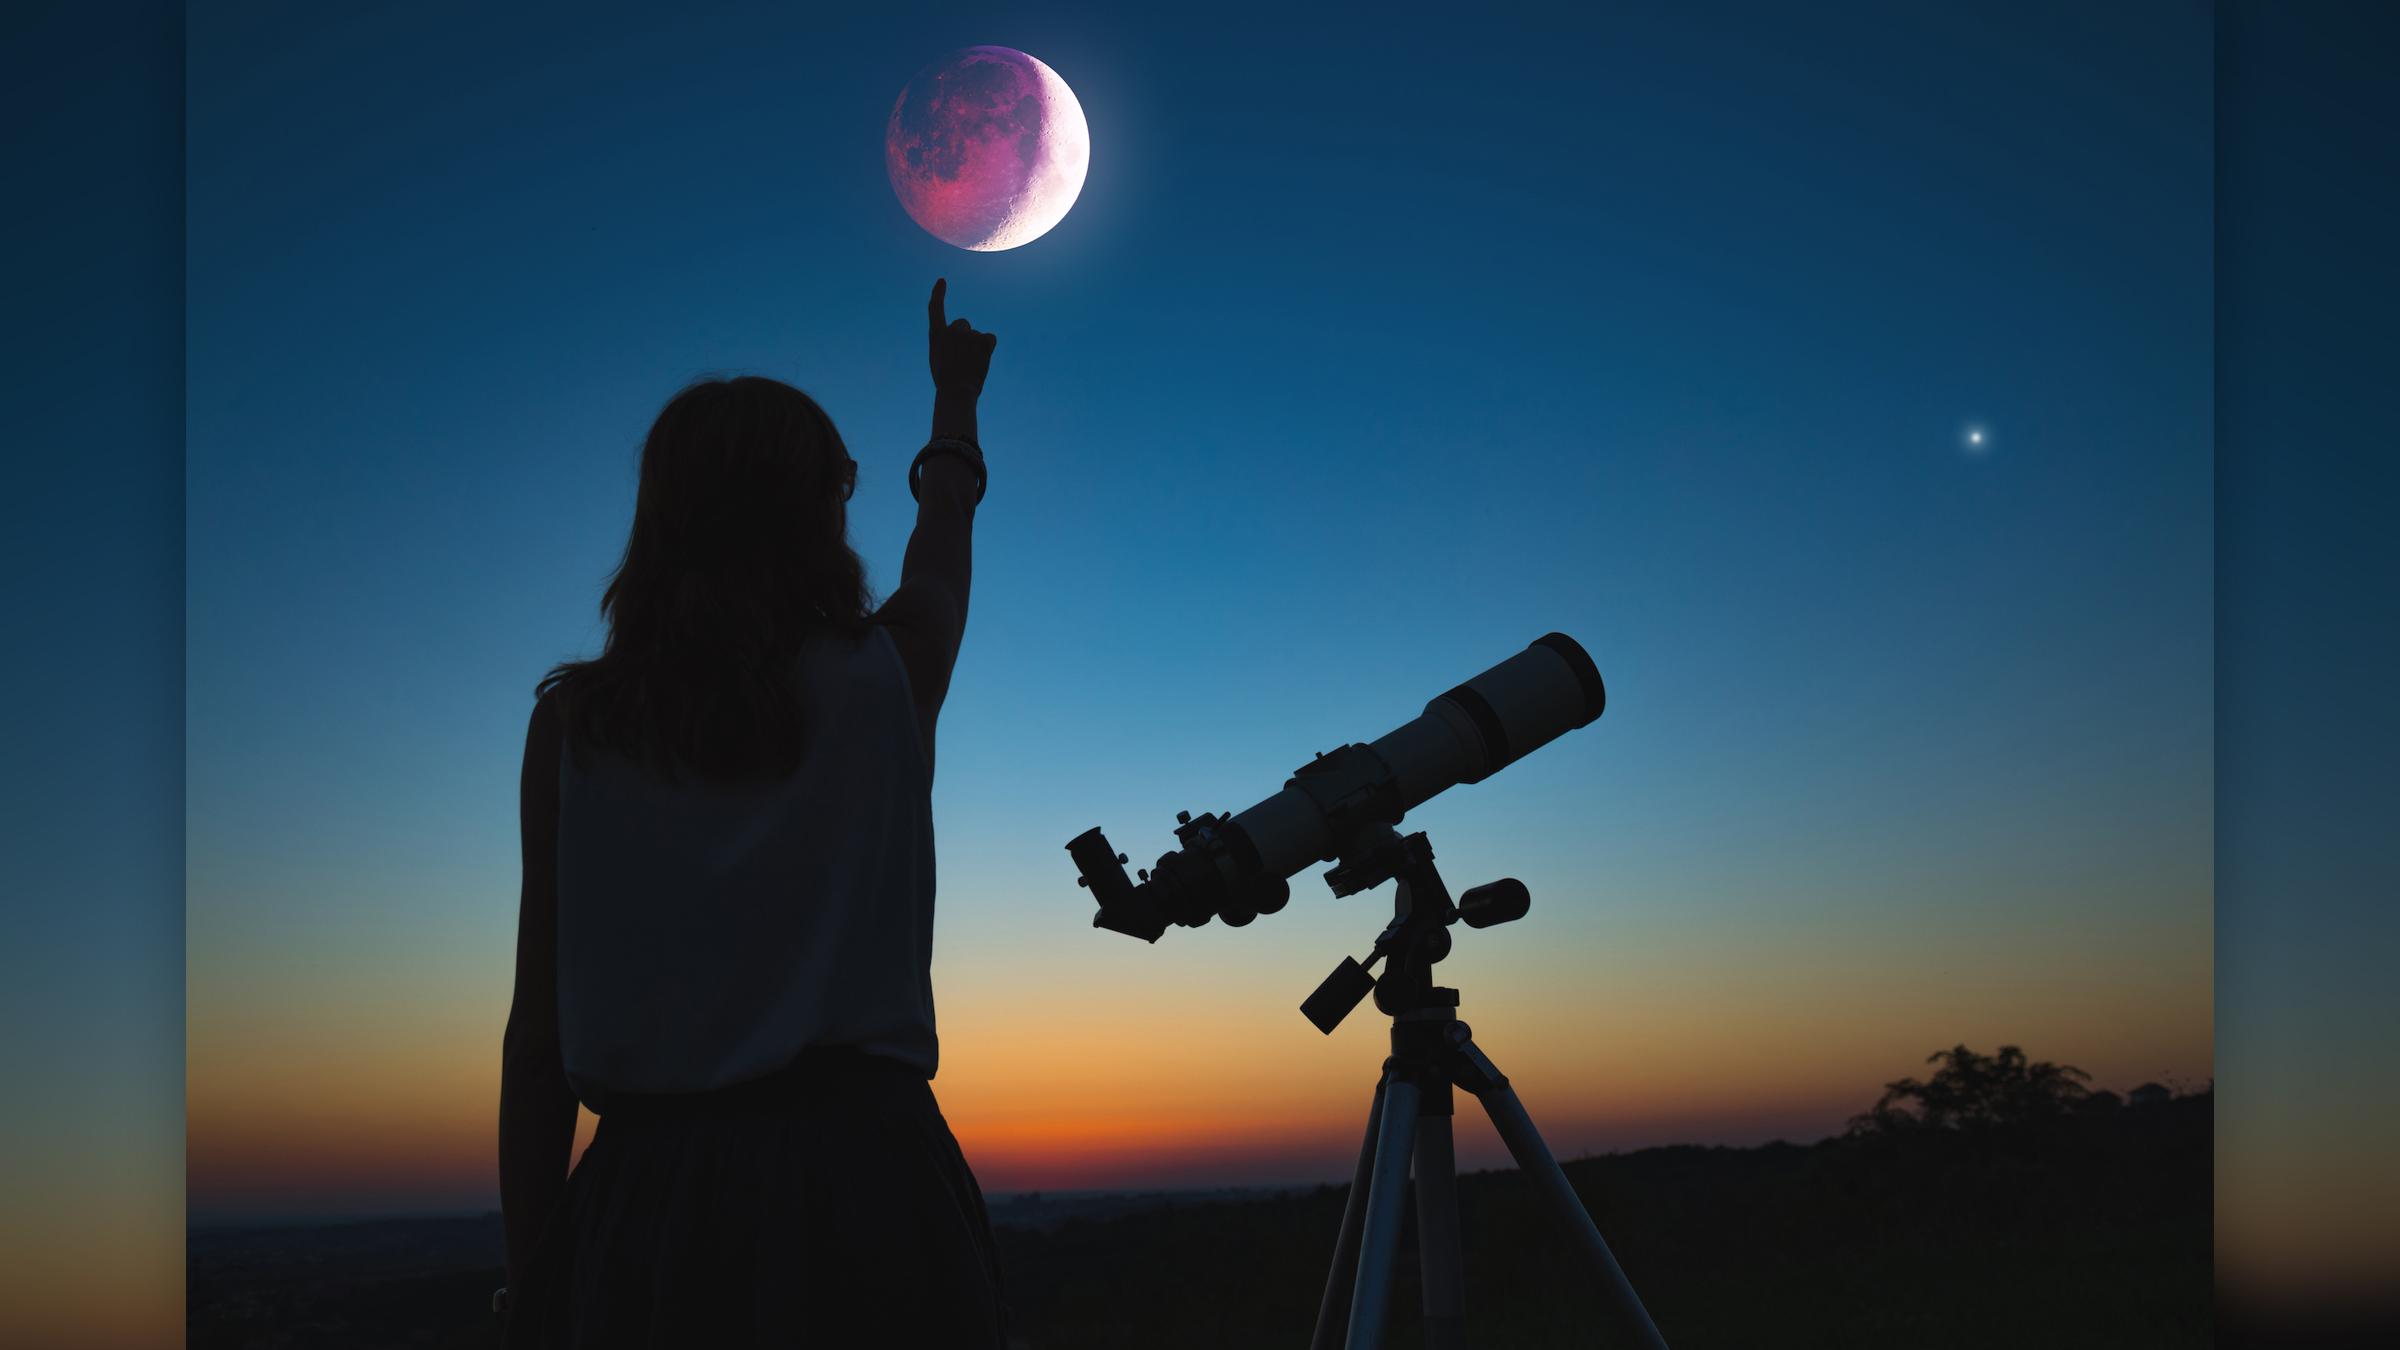 A girl with a telescope observes a lunar eclipse at dawn.